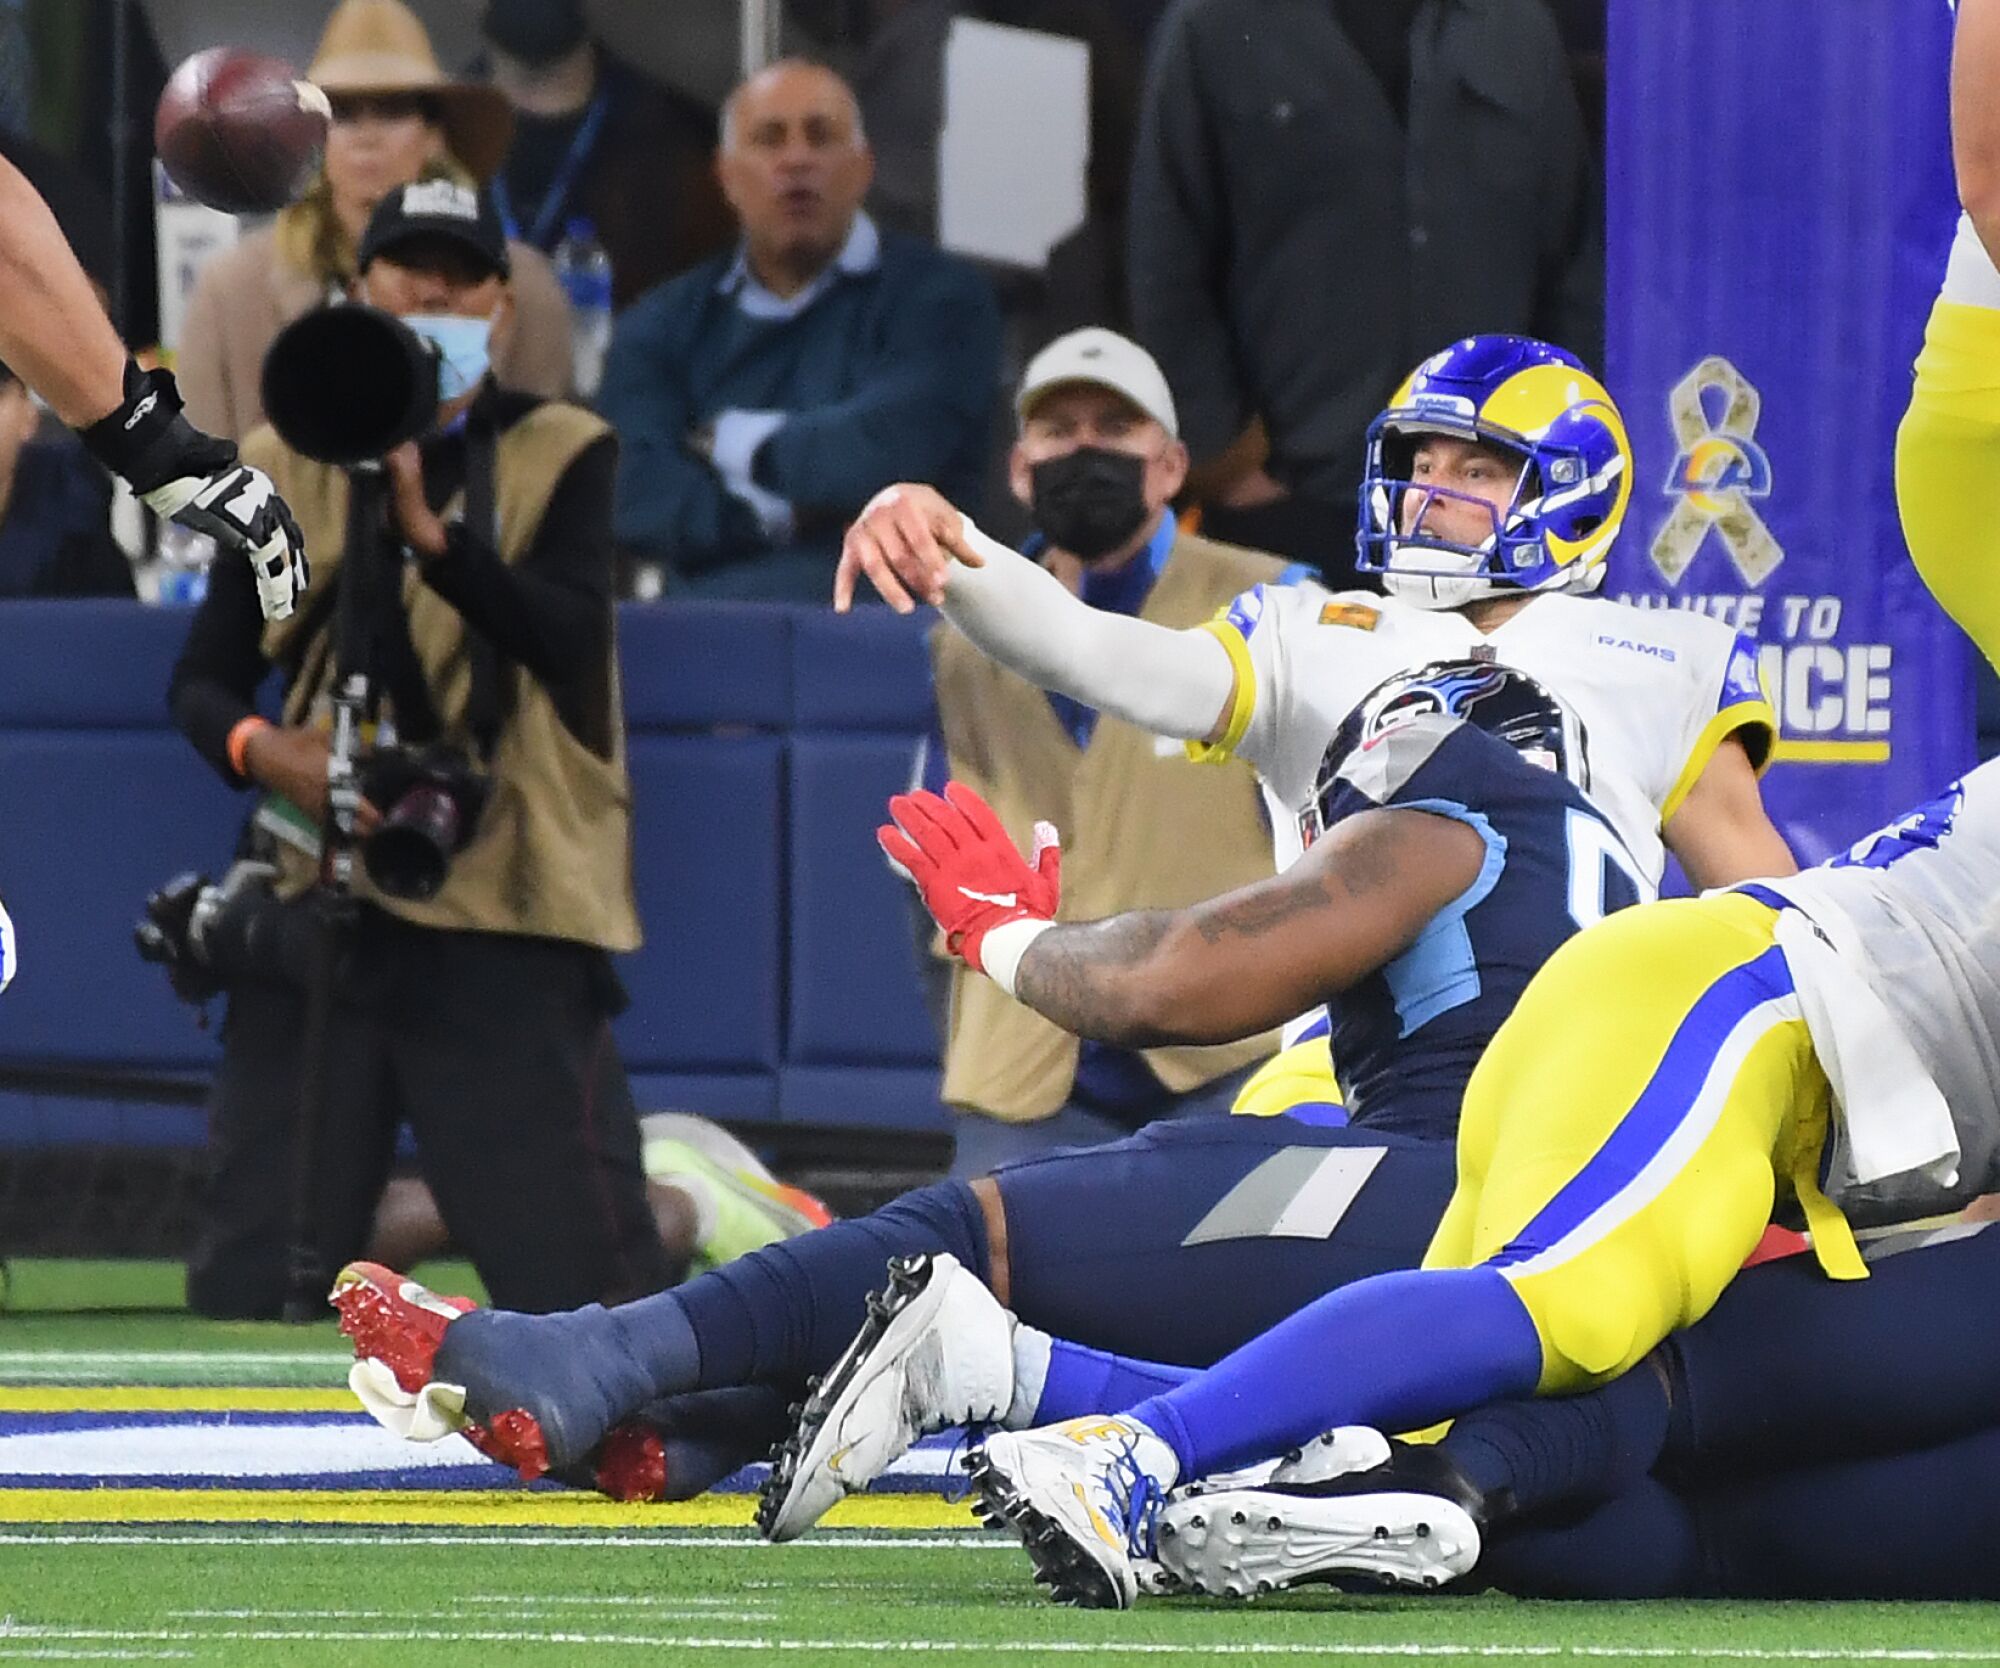 Rams quarterback Matthew Stafford throws an interception just before he's tackled in the end zone.